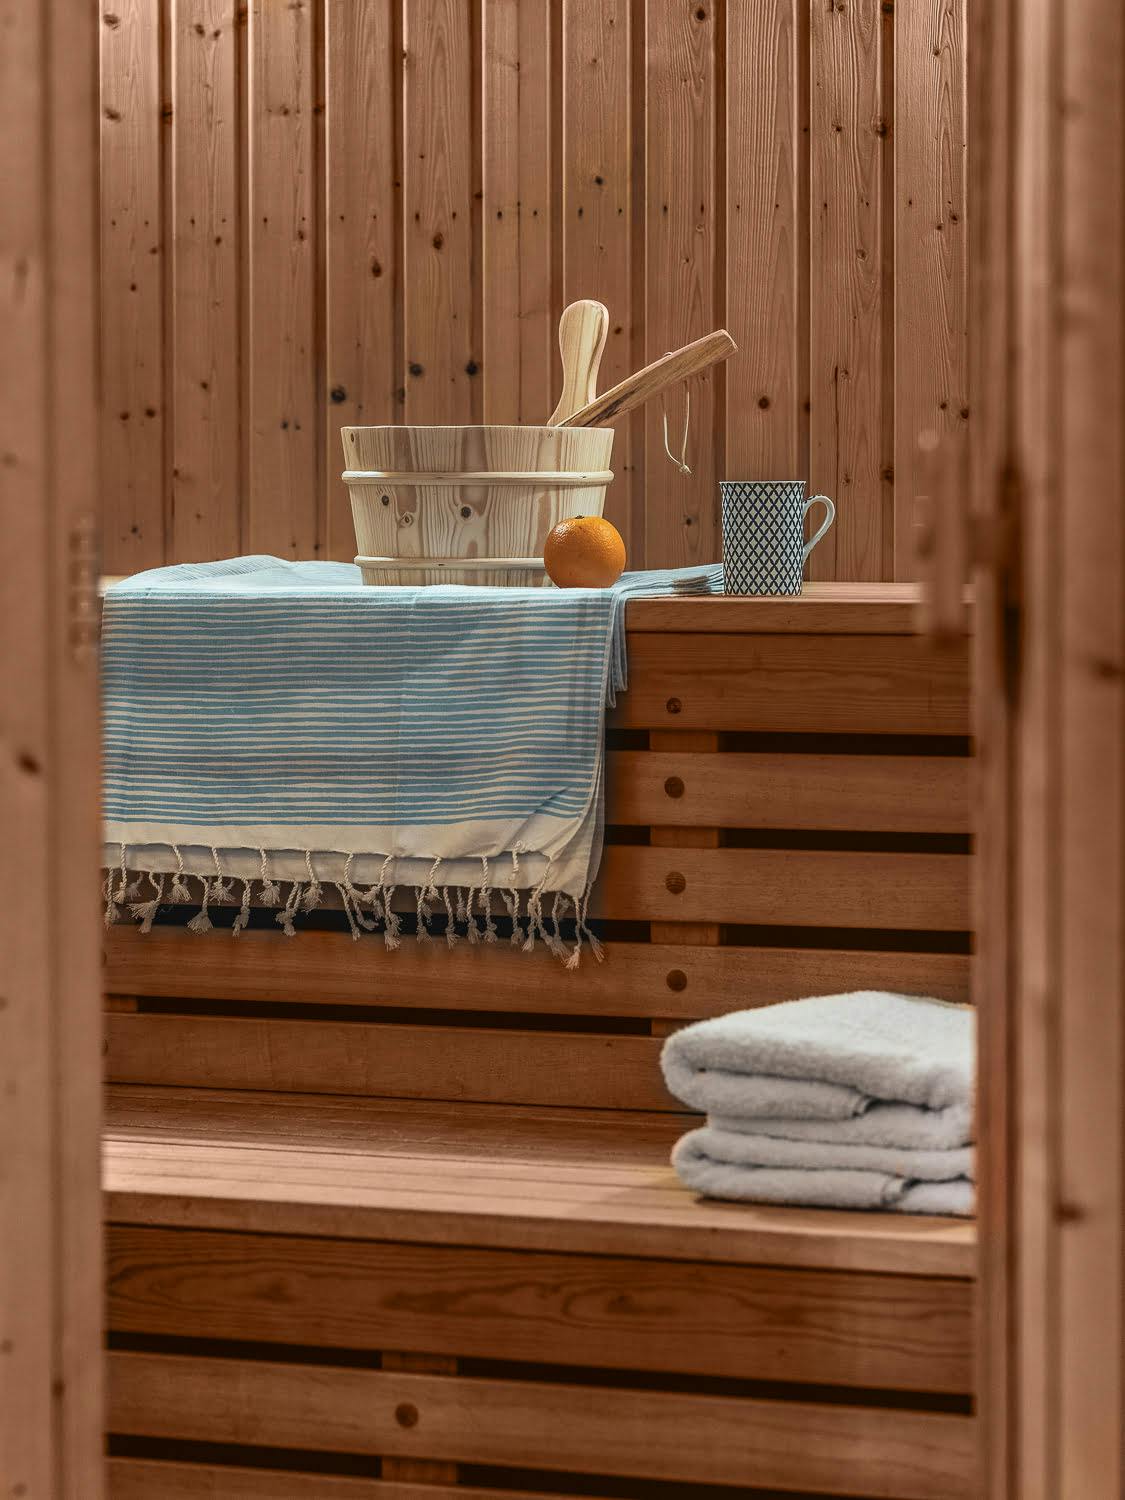 The sauna: one of the (many) treasures of these two villas.